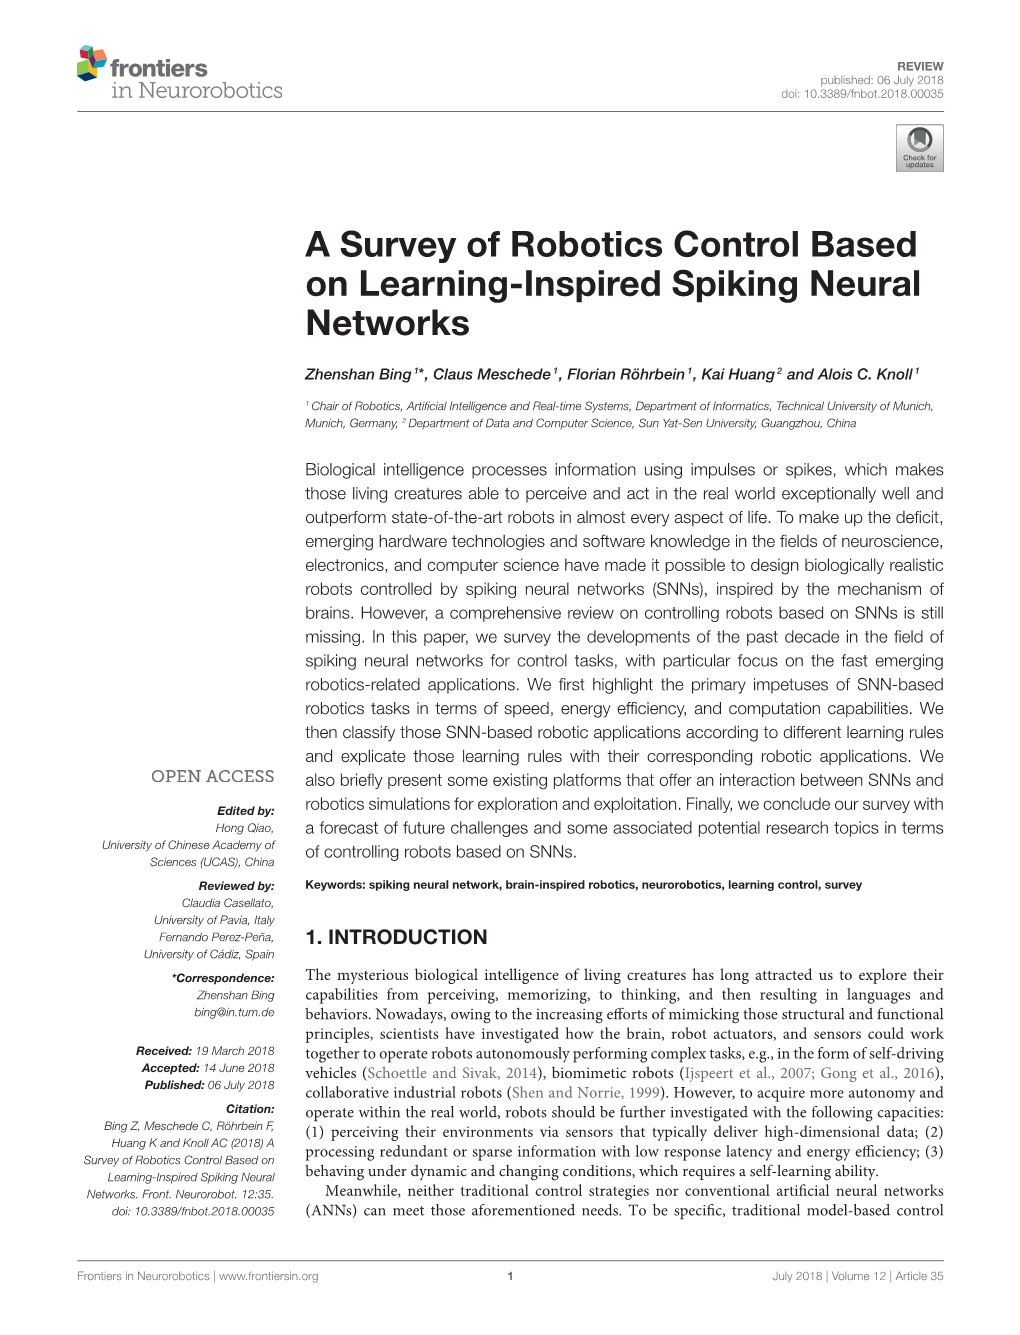 A Survey of Robotics Control Based on Learning-Inspired Spiking Neural Networks